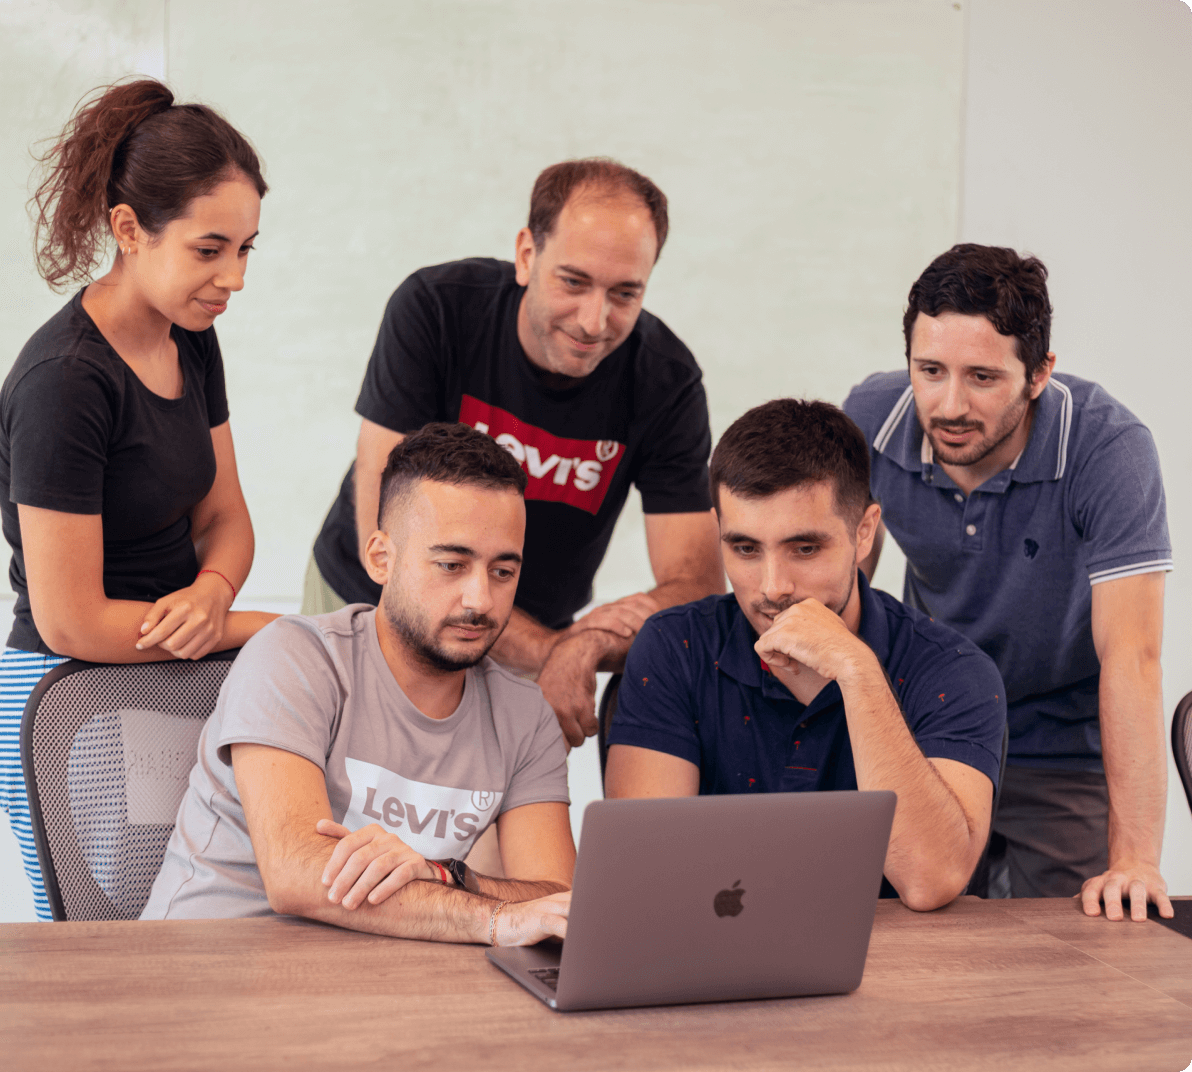 Imajine team working together in a project